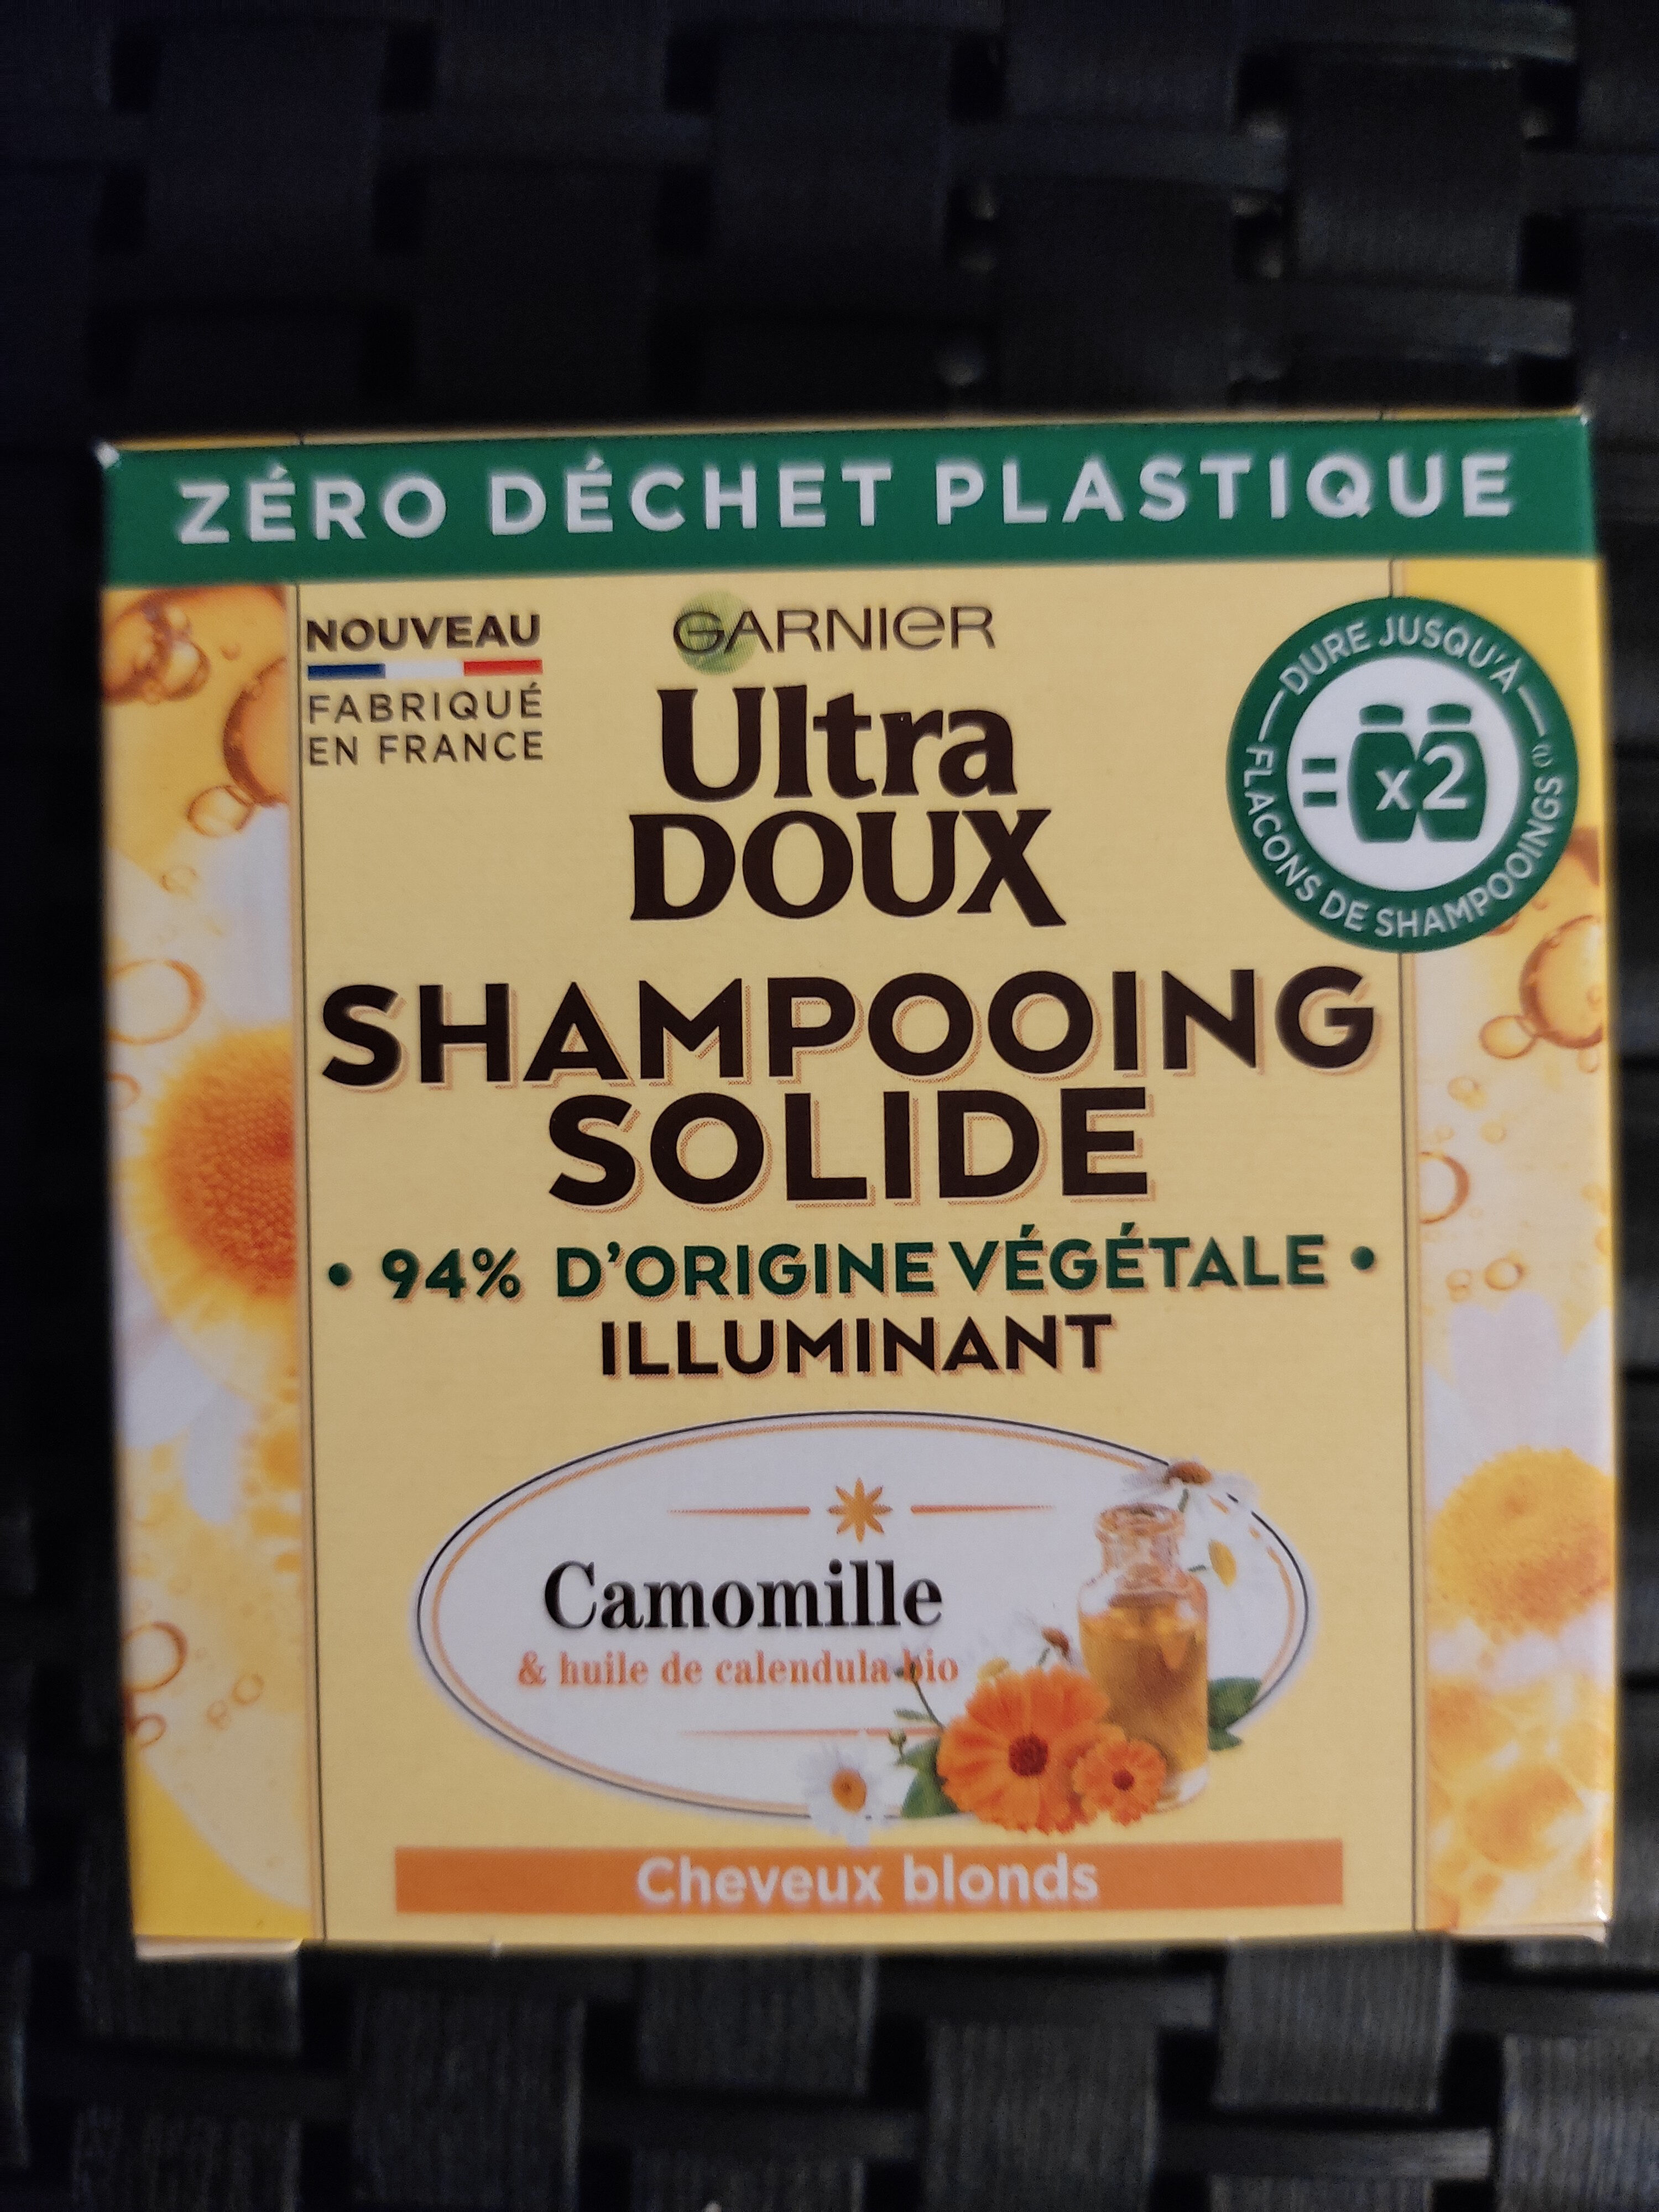 Shampooing solide camomille - Produit - fr